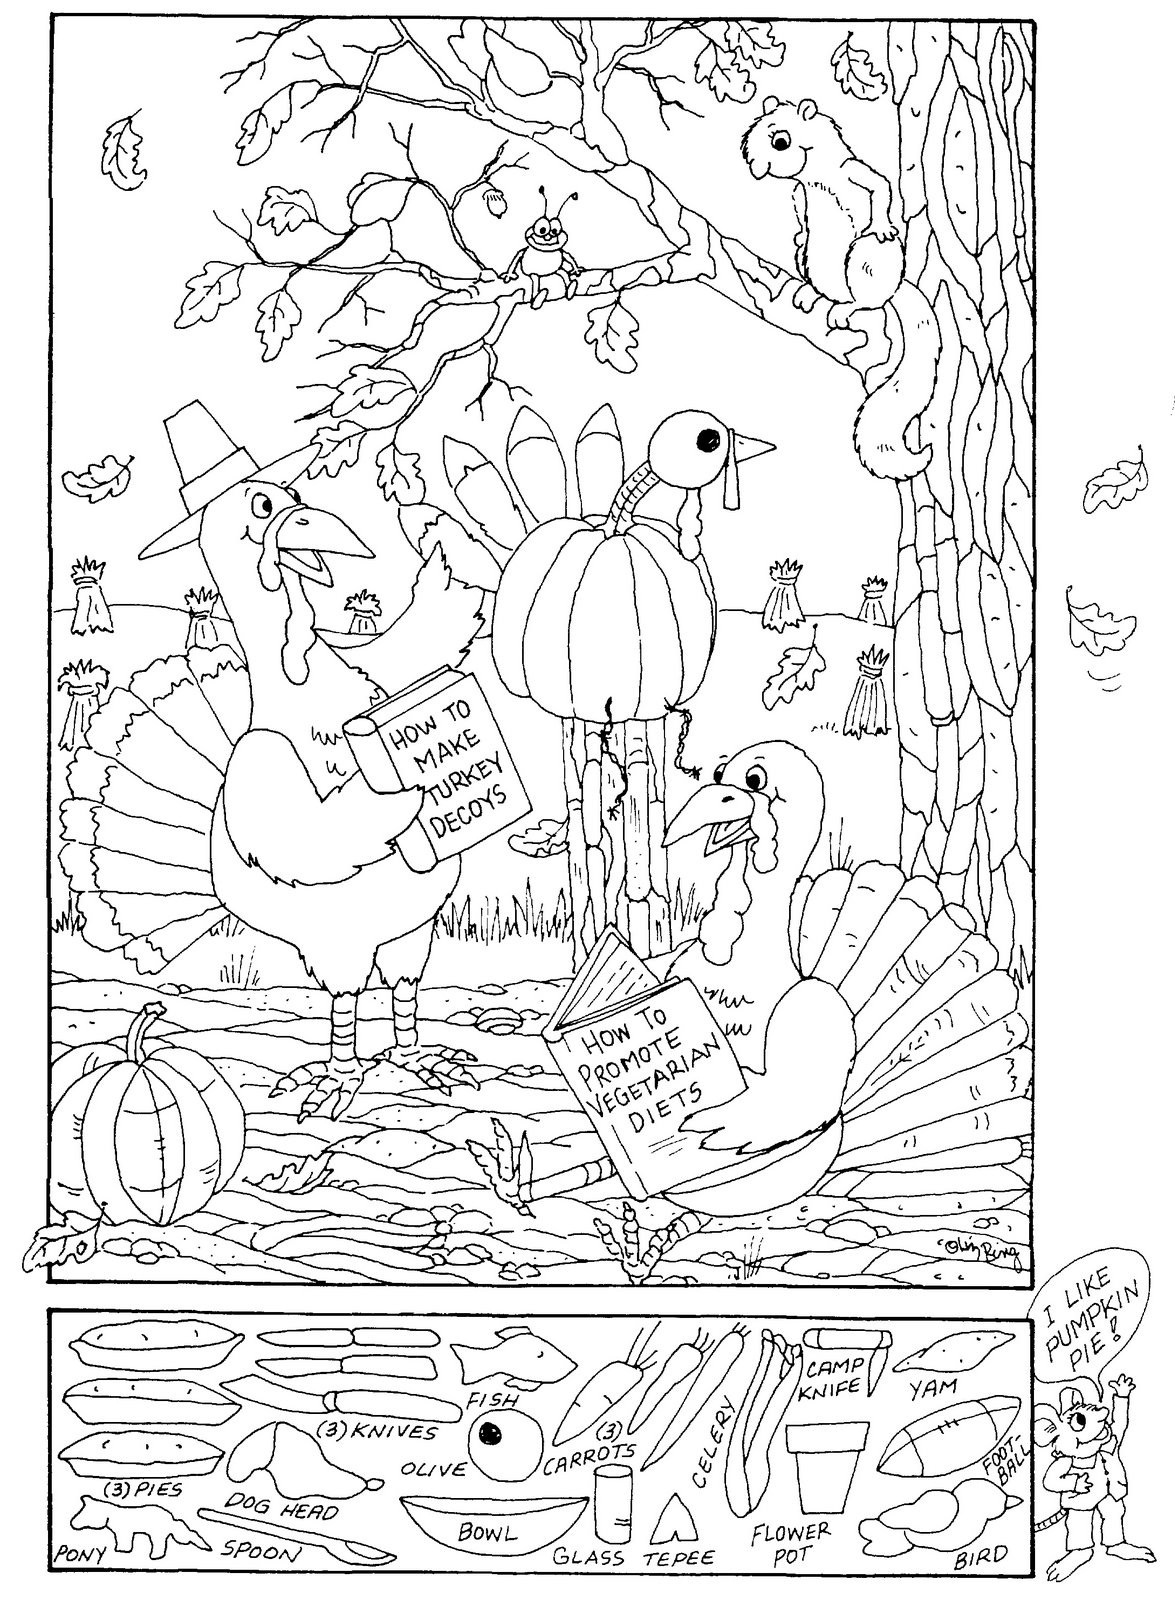 Printable Thanksgiving Hidden Picture Games_21937